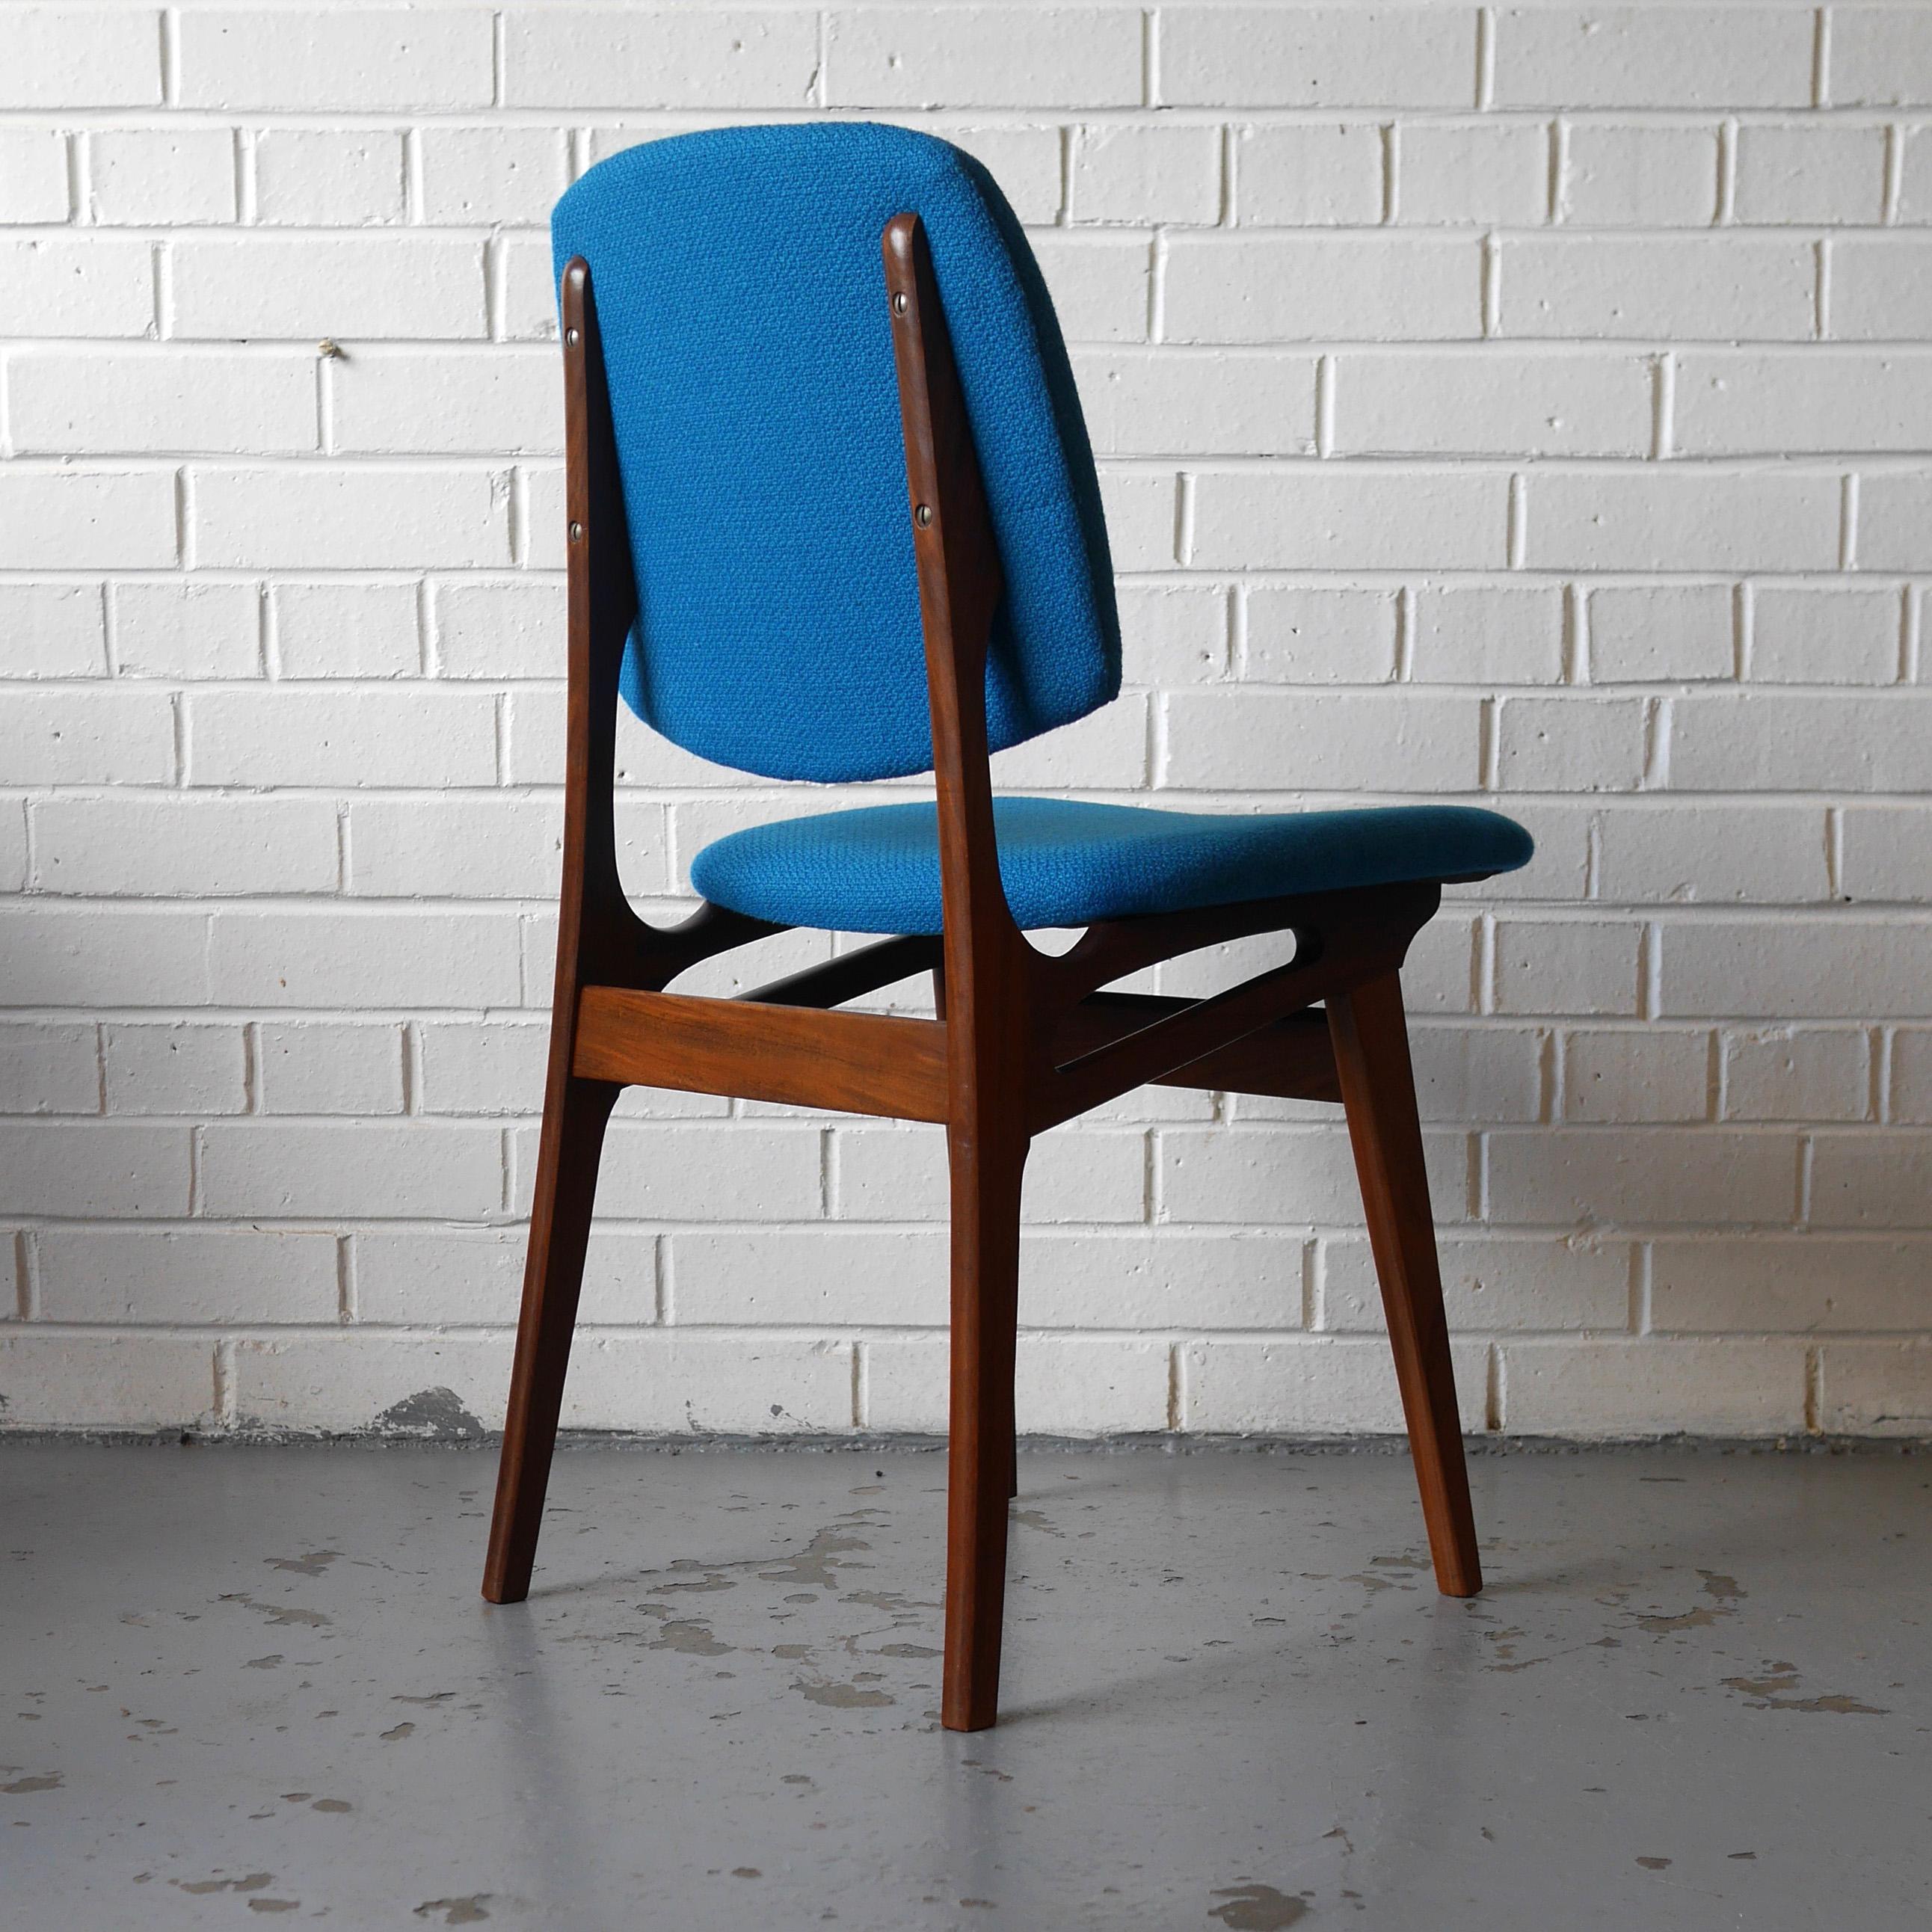 Set of Four Solid Afrormosia Dining Chairs with Blue Wool Upholstery, circa 1961 For Sale 2